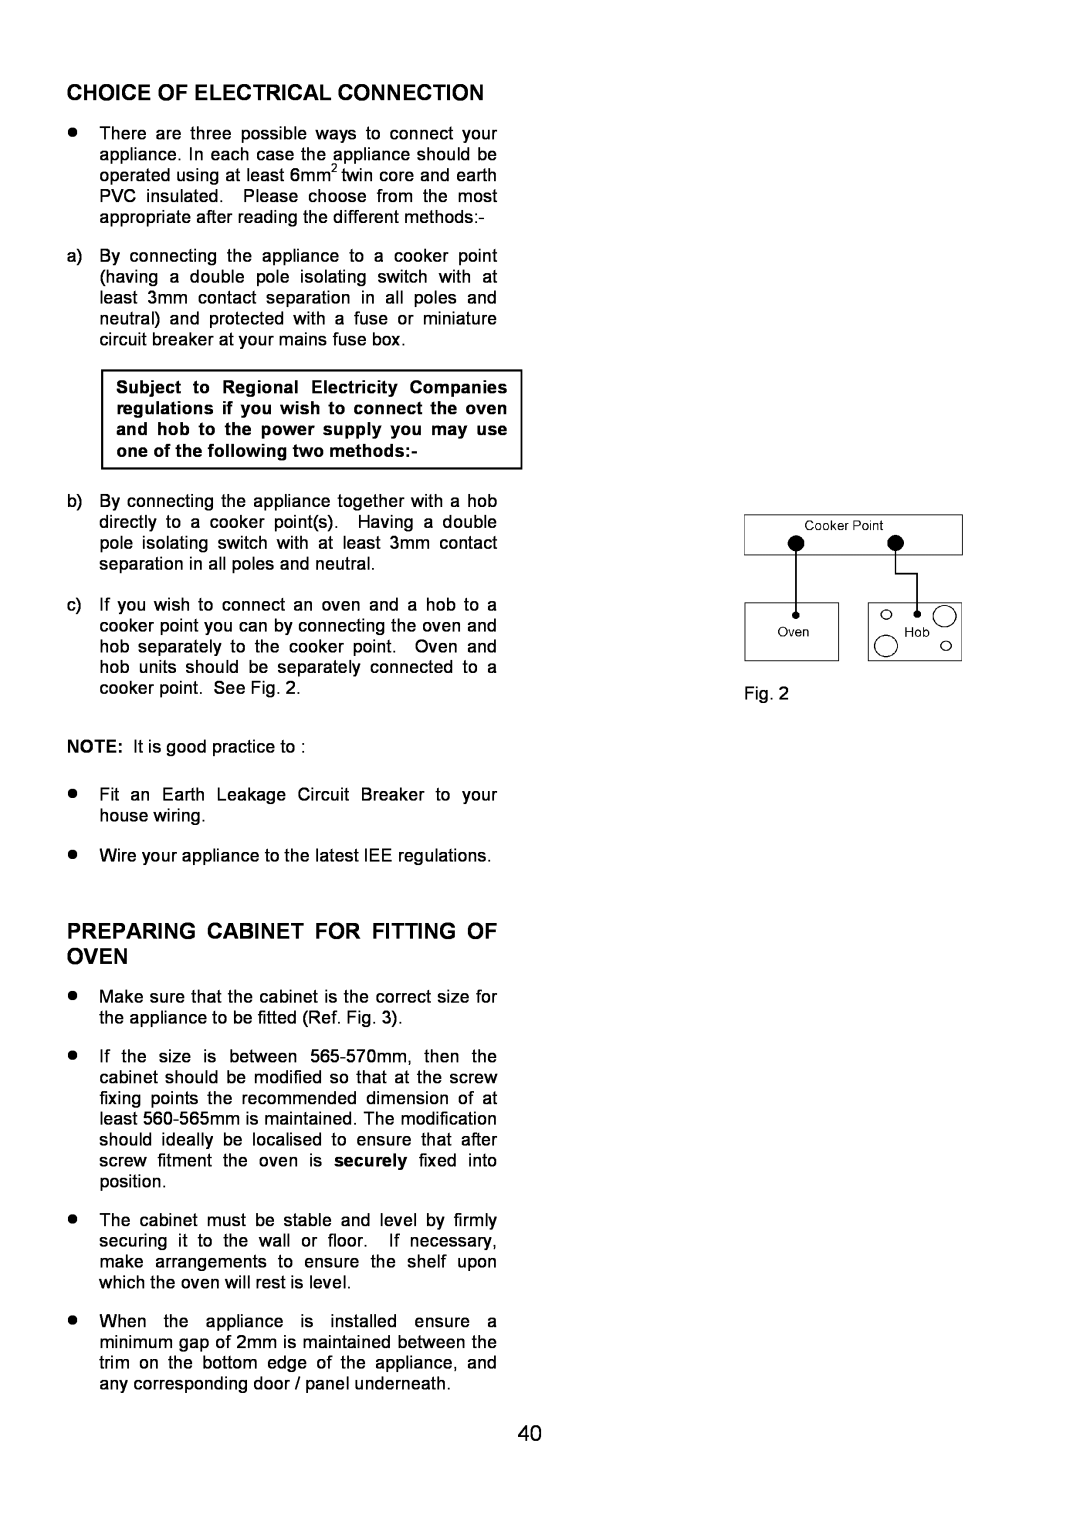 Electrolux D4101-4 operating instructions Choice Of Electrical Connection, Preparing Cabinet For Fitting Of Oven 